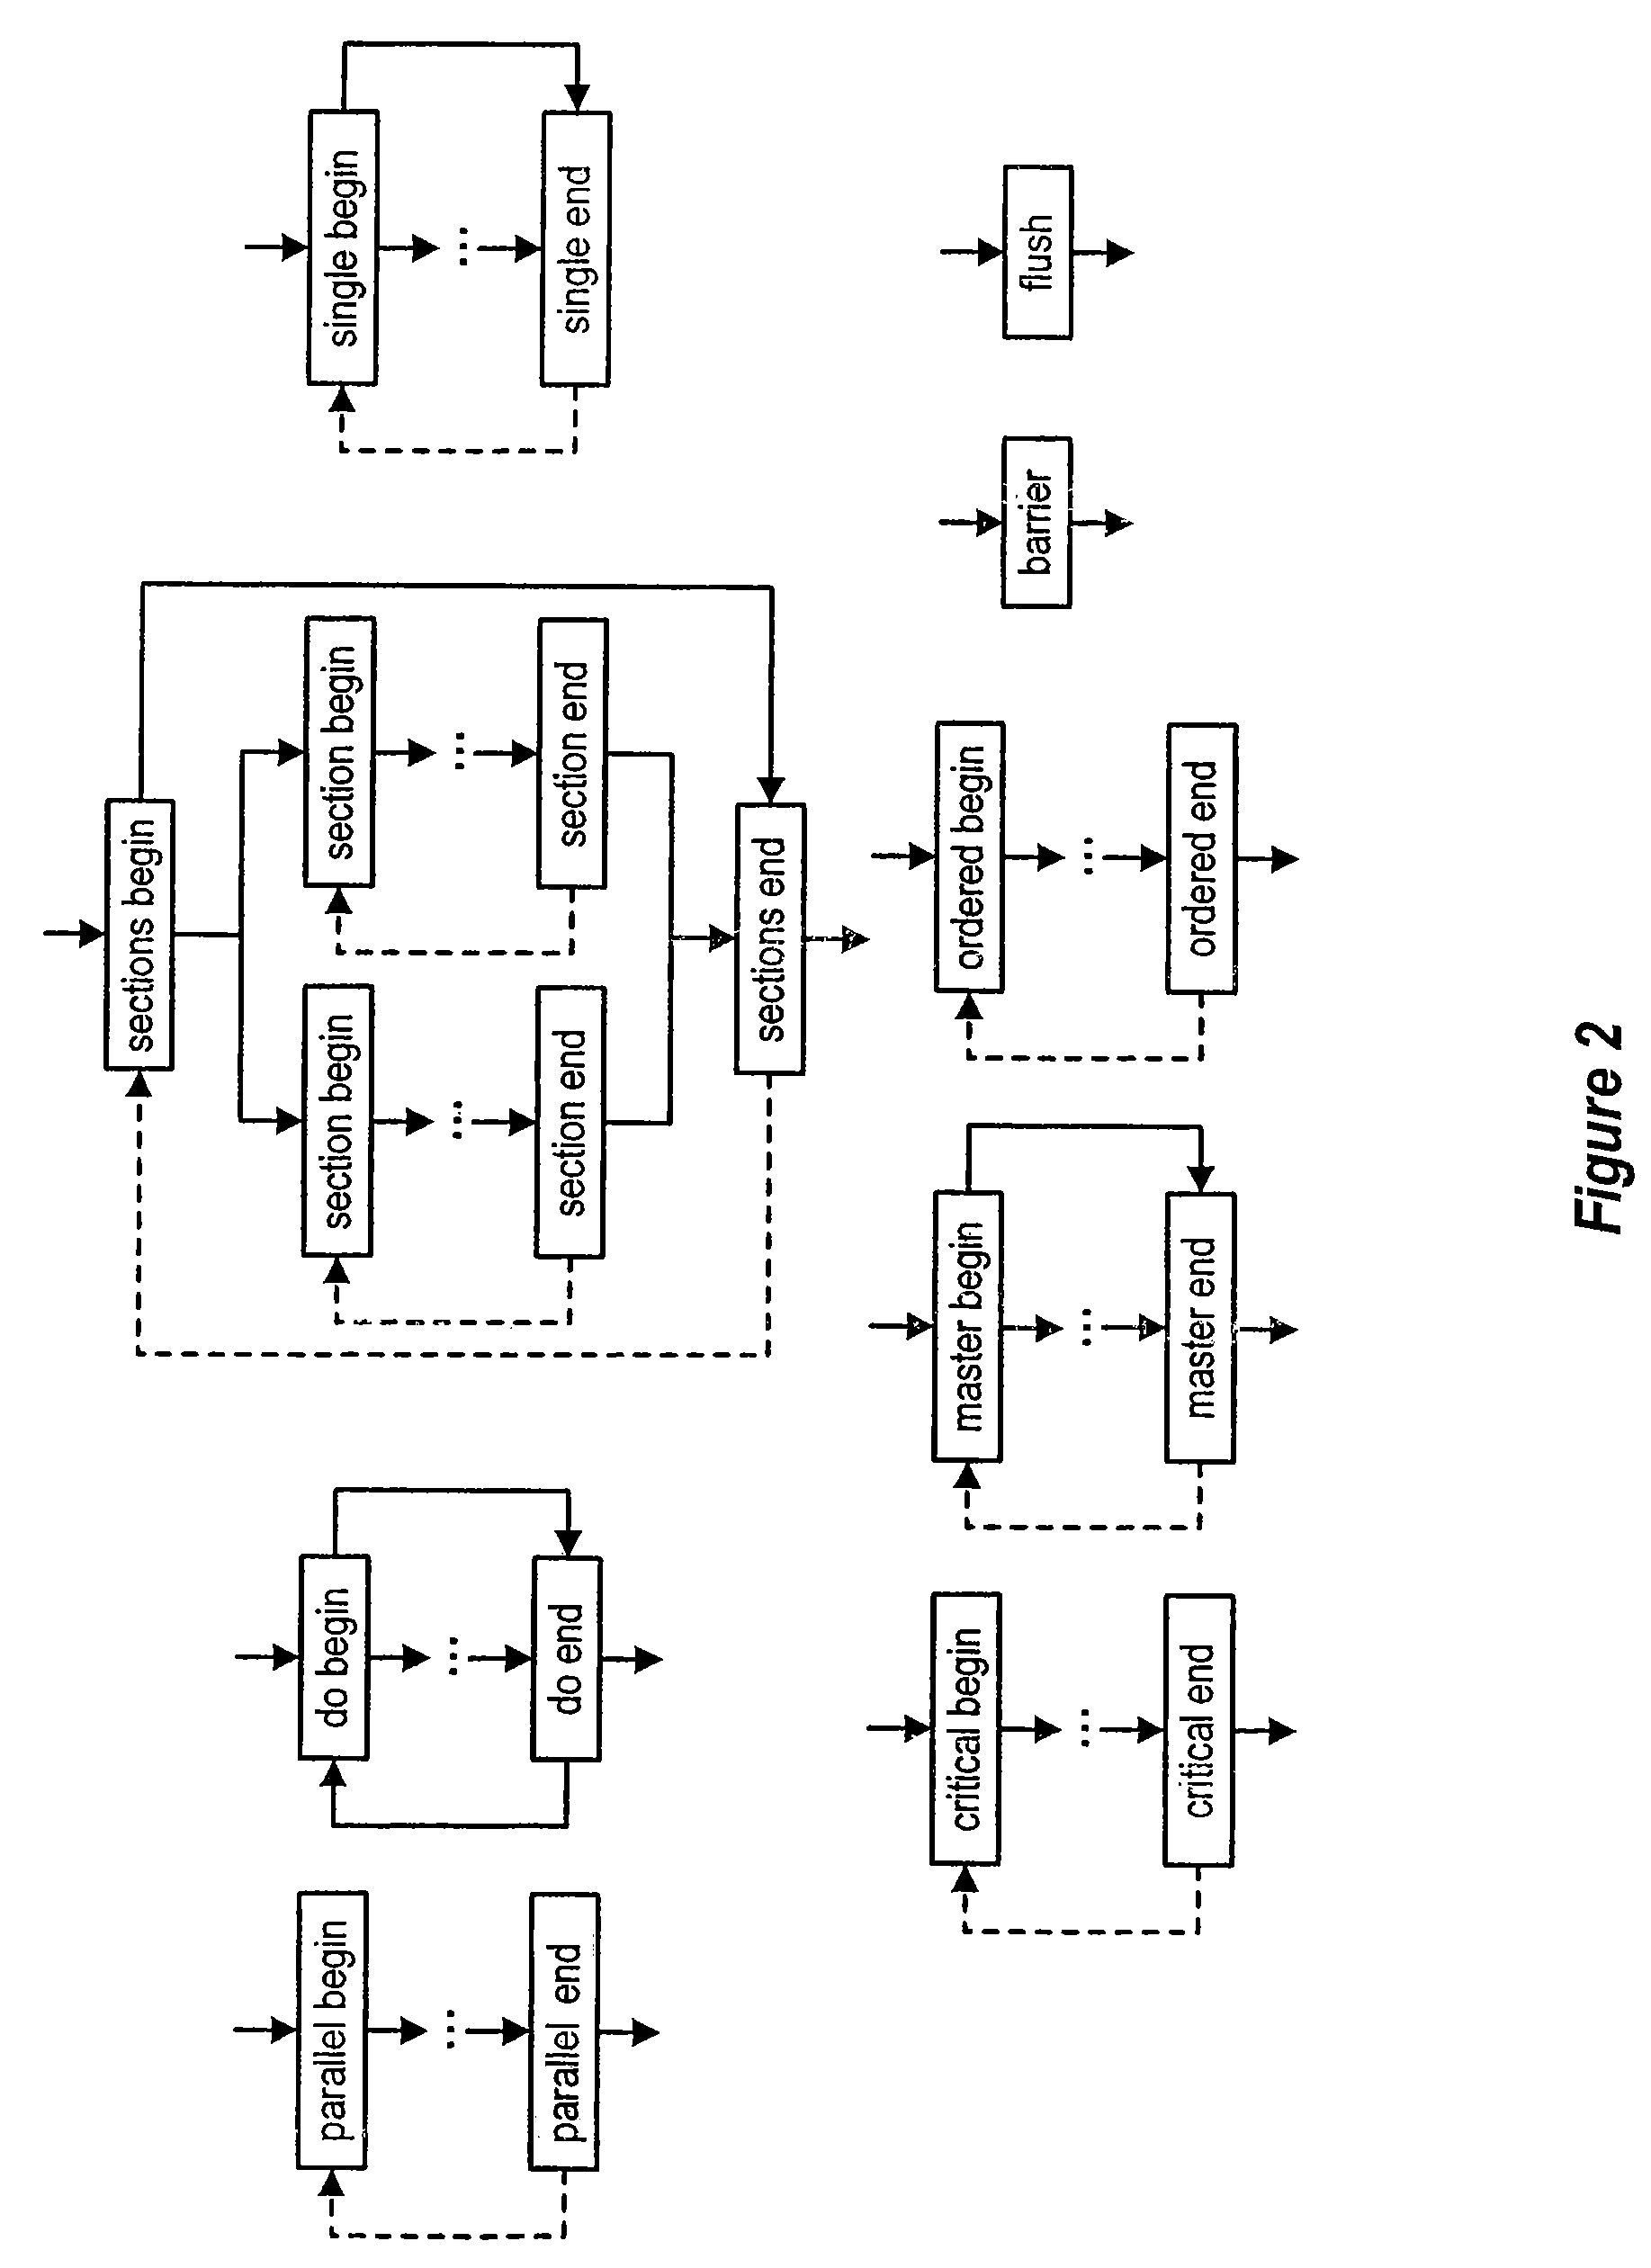 System and method for compile-time non-concurrency analysis